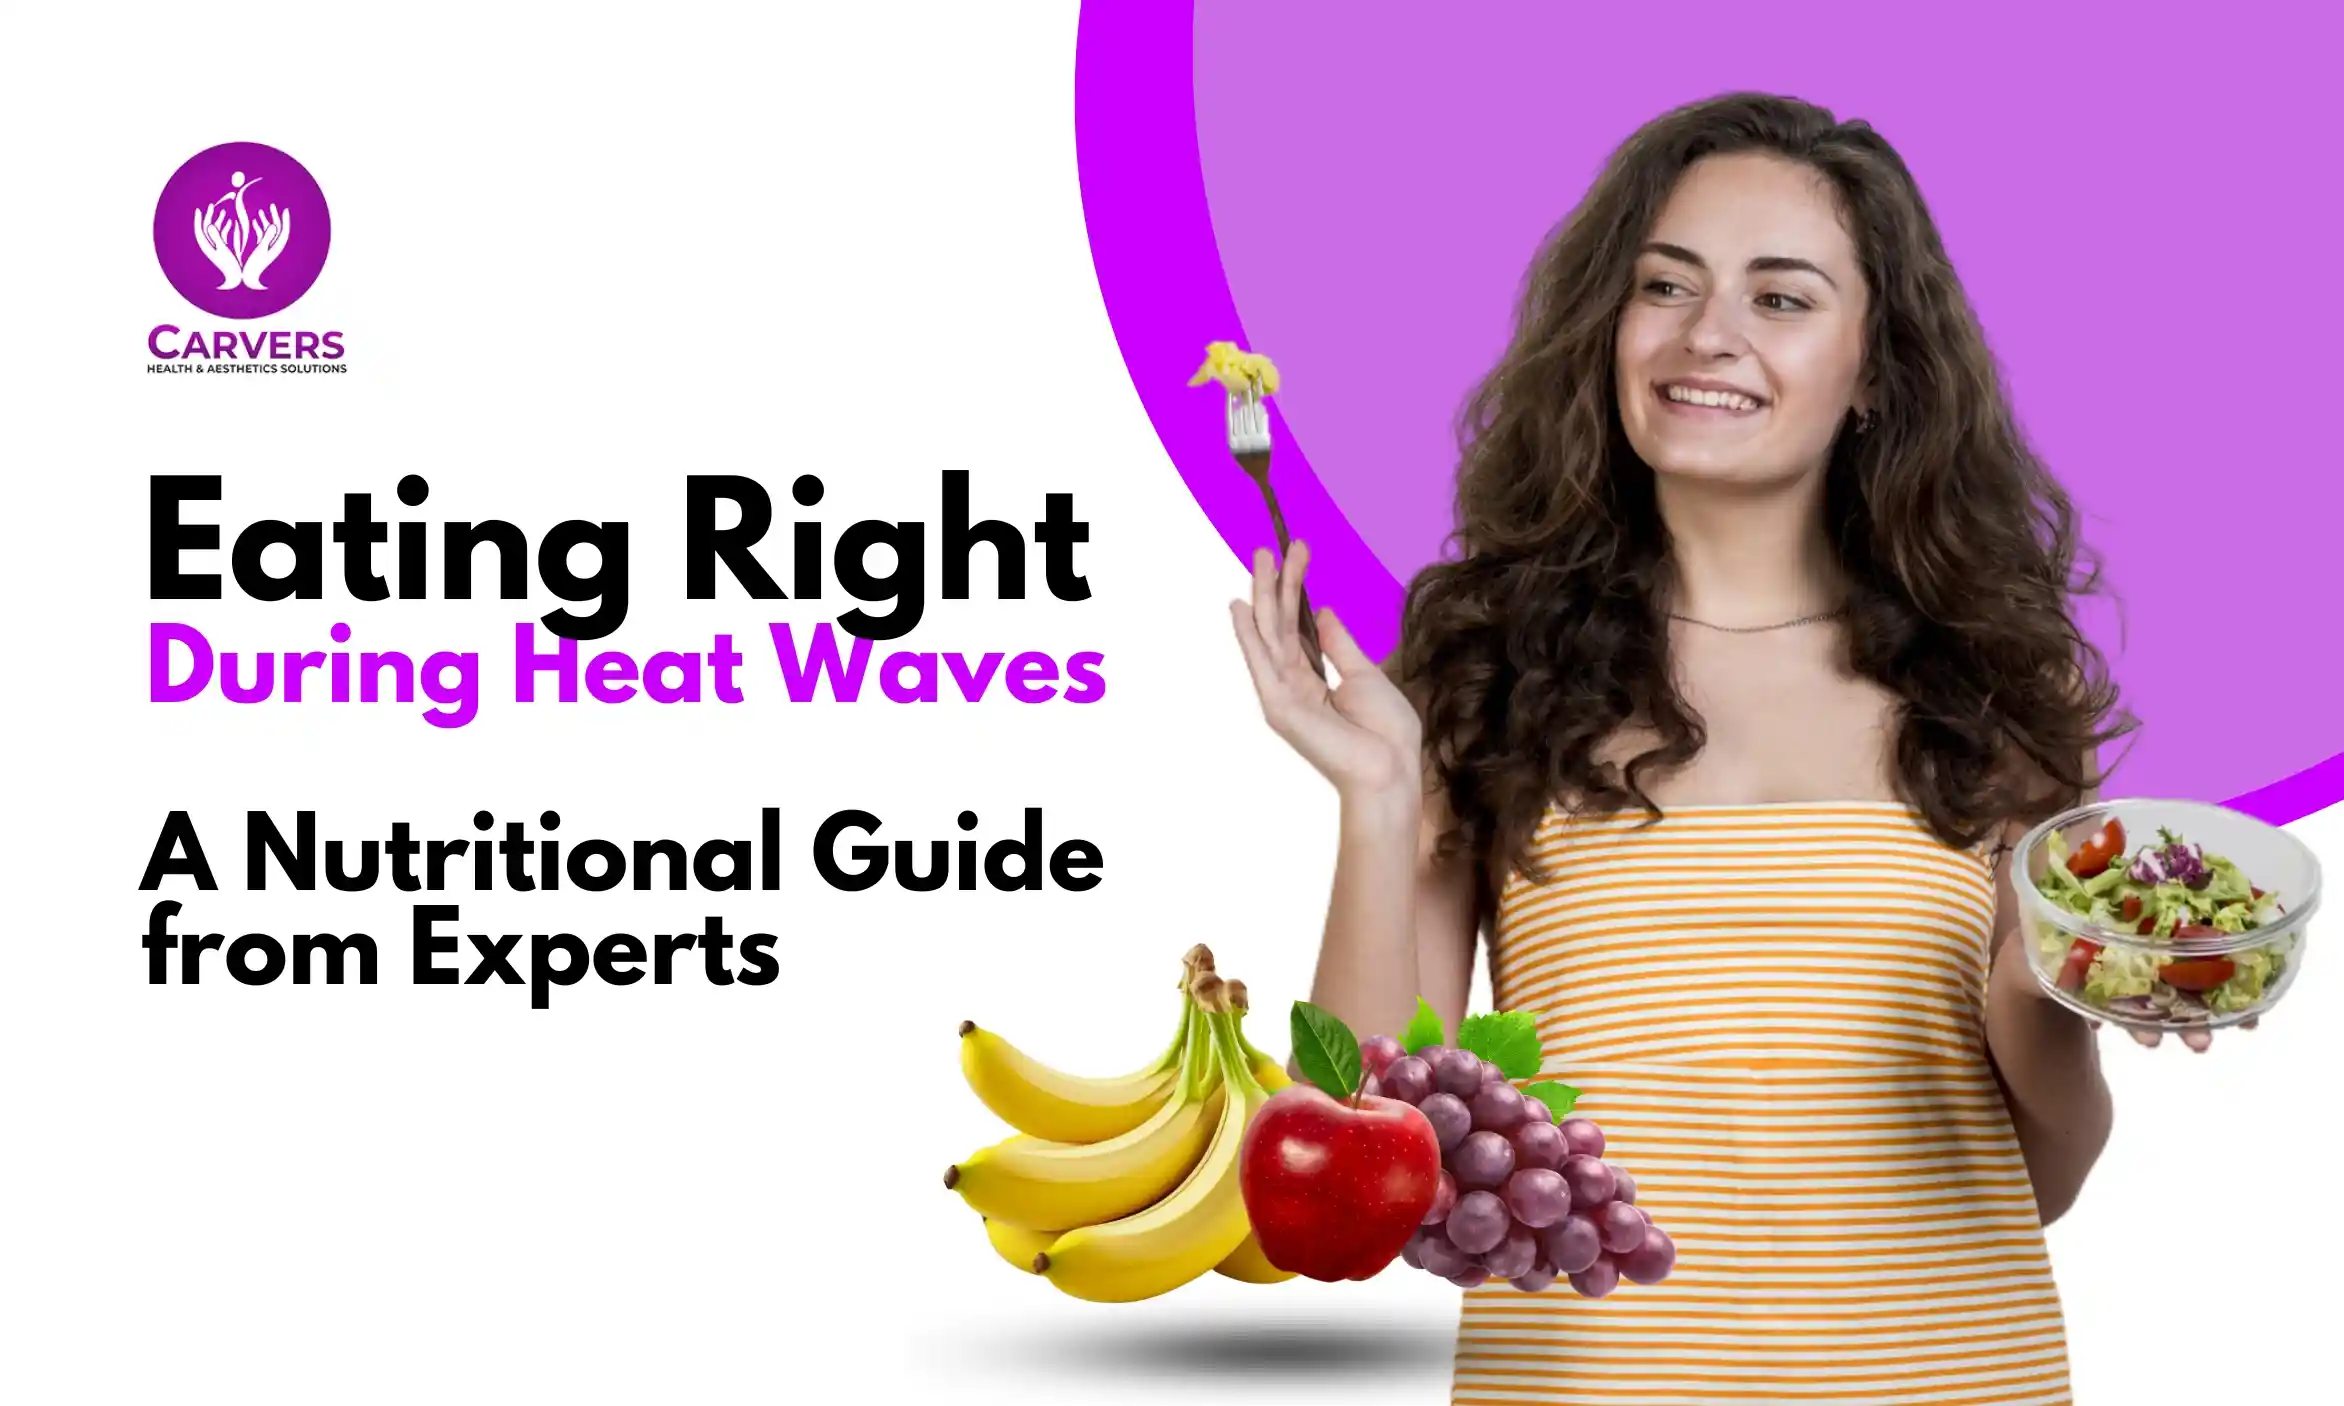 Eating Right During Heat Waves: A Nutritional Guide from Experts